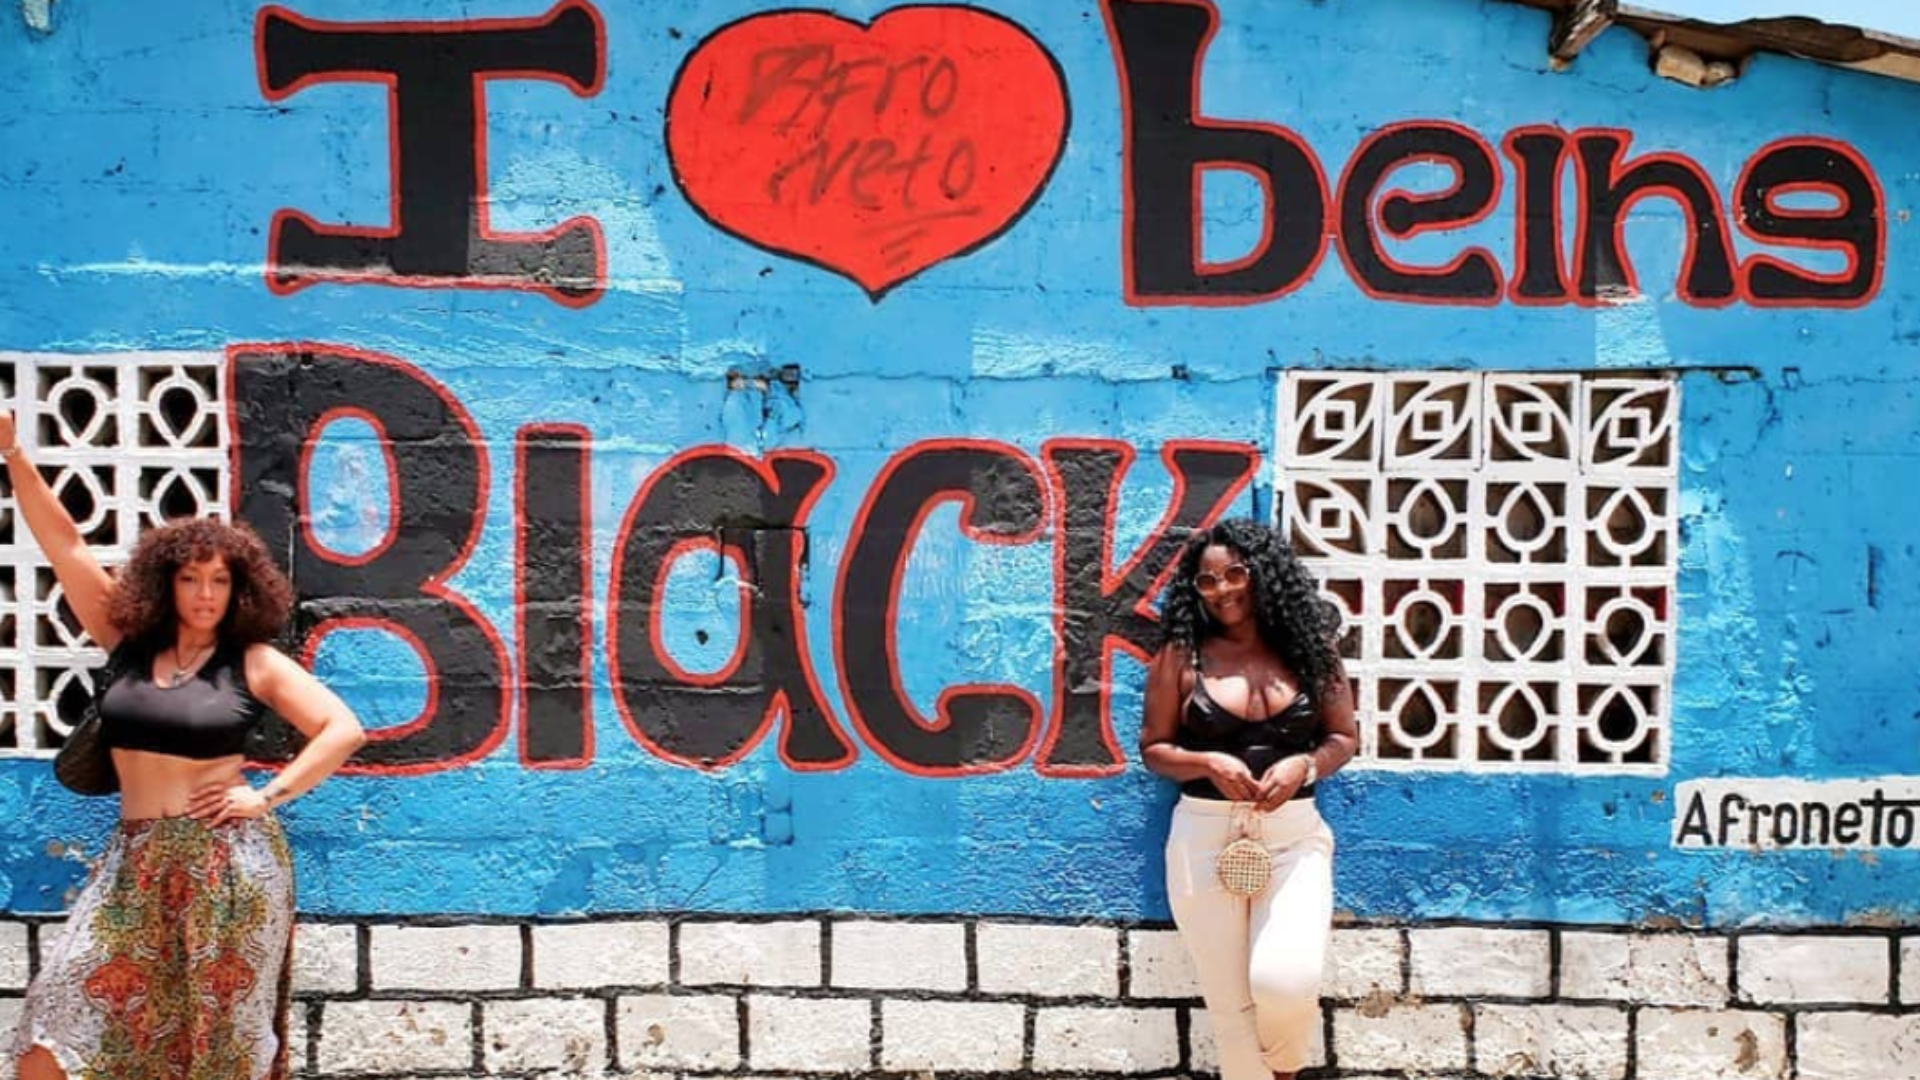 Black Travel Vibes: Do It For The Culture In Cartagena